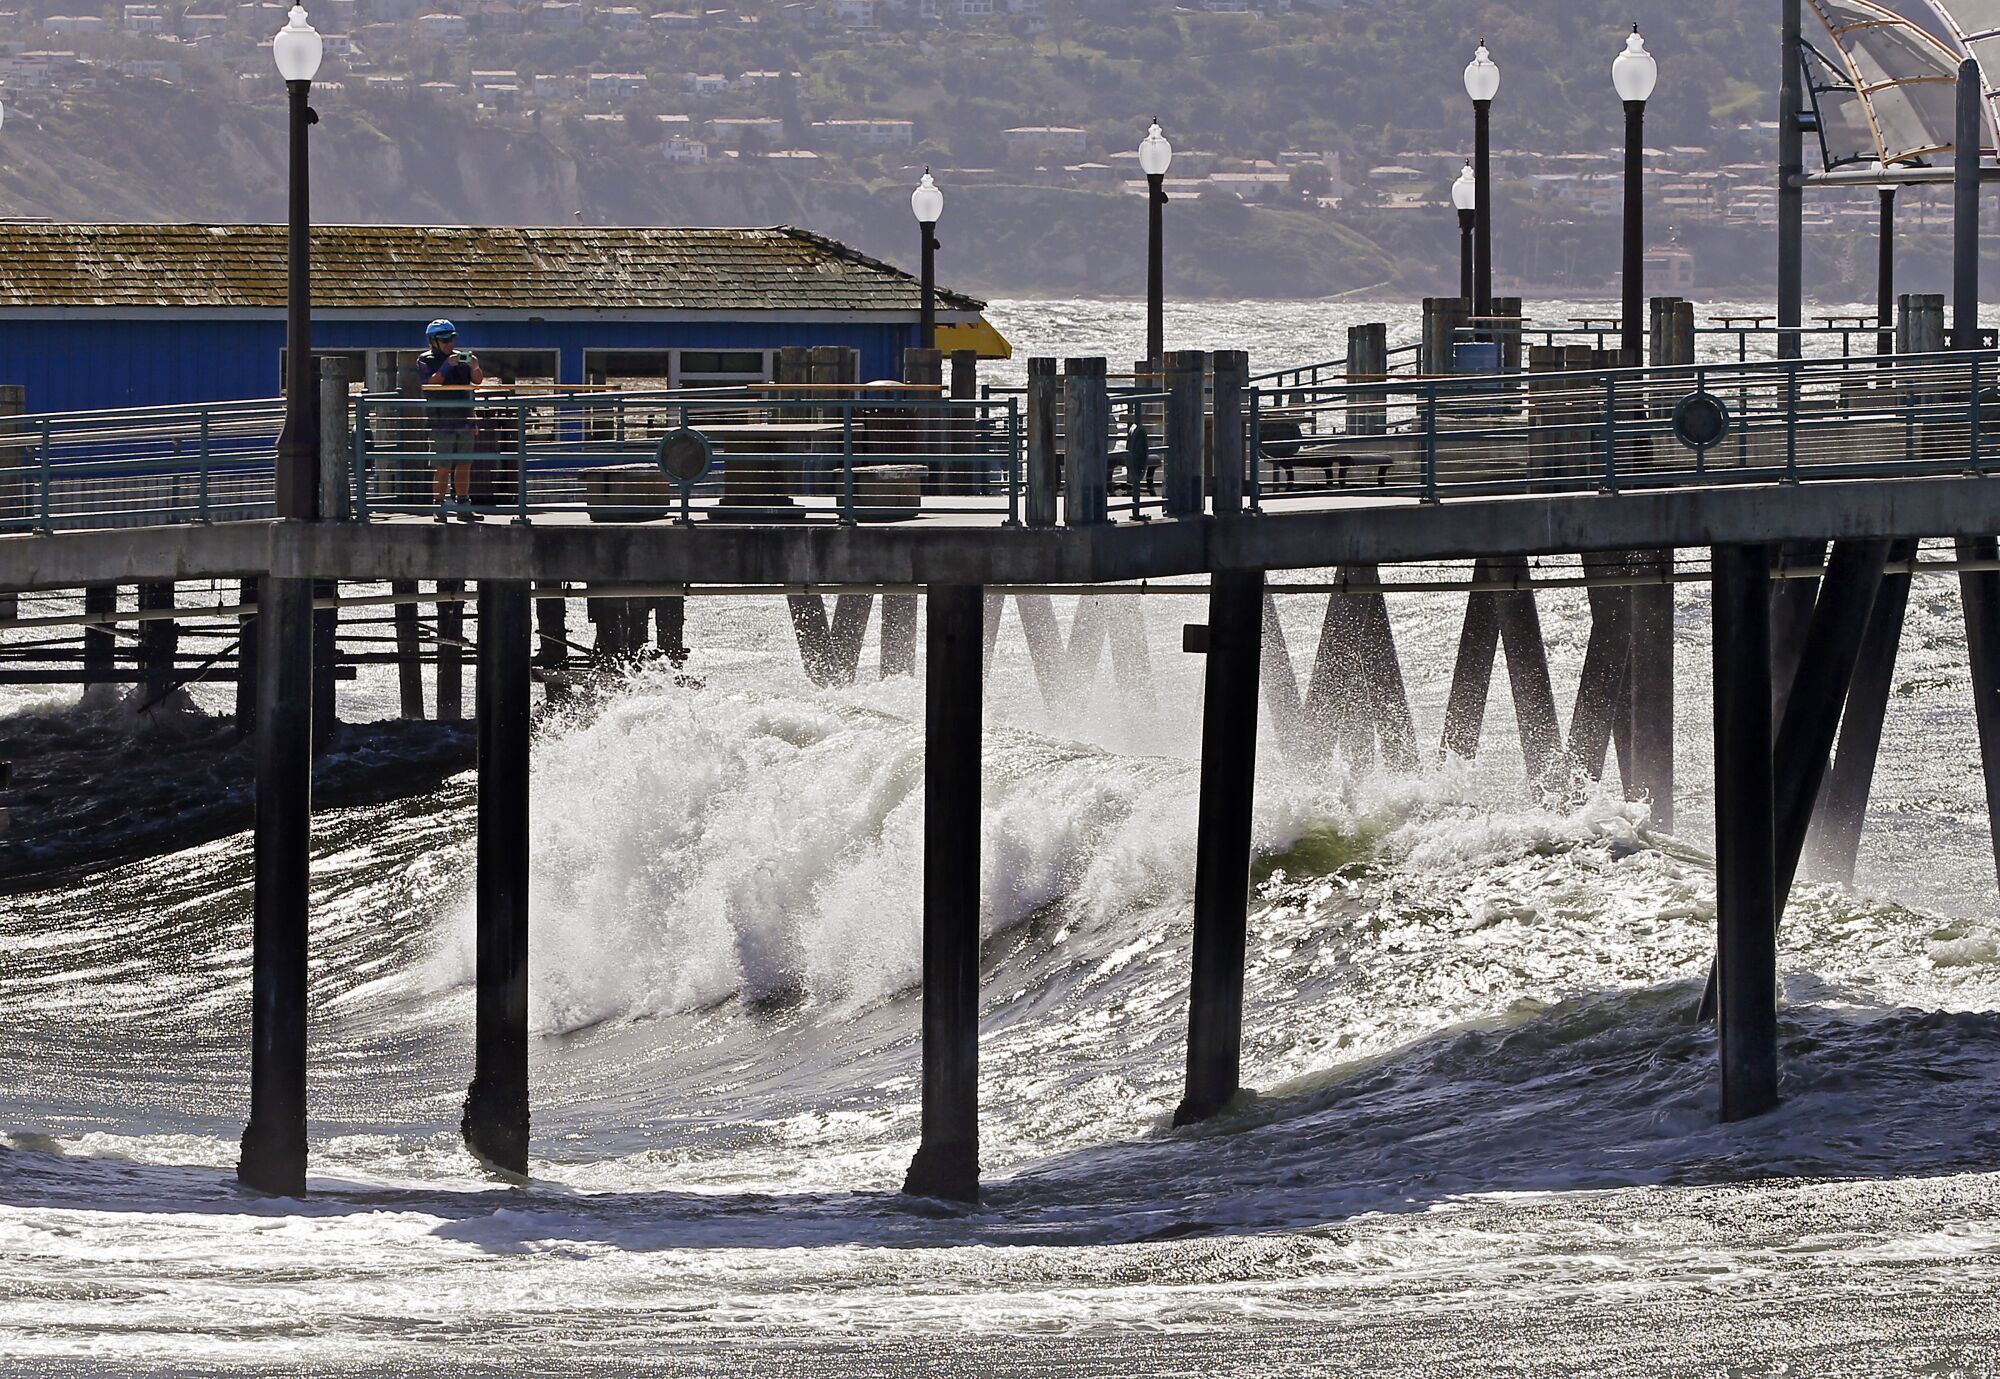 A visitor to the Redondo Beach Pier watches waves roll ashore on Wednesday.